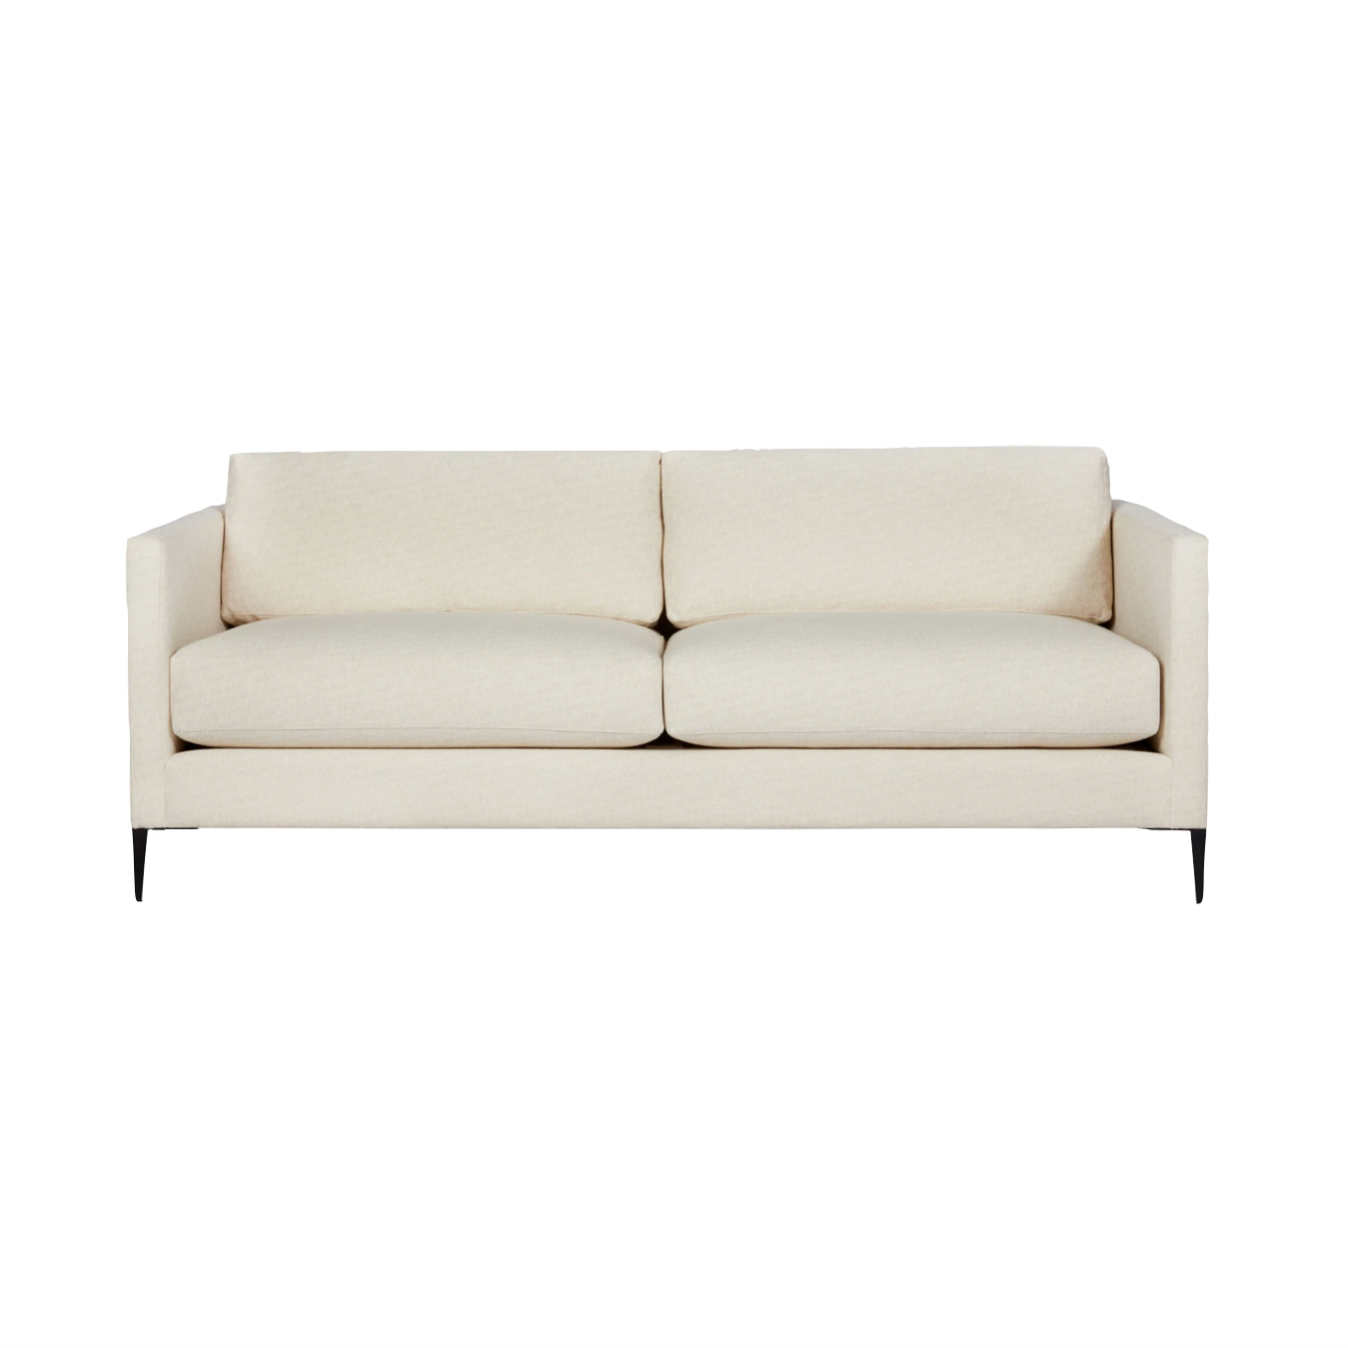 The Benedict Upholstered Sofa Family - Essentials by Cisco Brothers is a modern design with clean lines and sleek metal legs in black rust. It has a fresh and functional aesthetic with no-sag support. As a small scale sofa, its ideal for apartment living and suitable for any occasion.  Benedict 84" Sofa: 84”w x 29”h x 36”d 